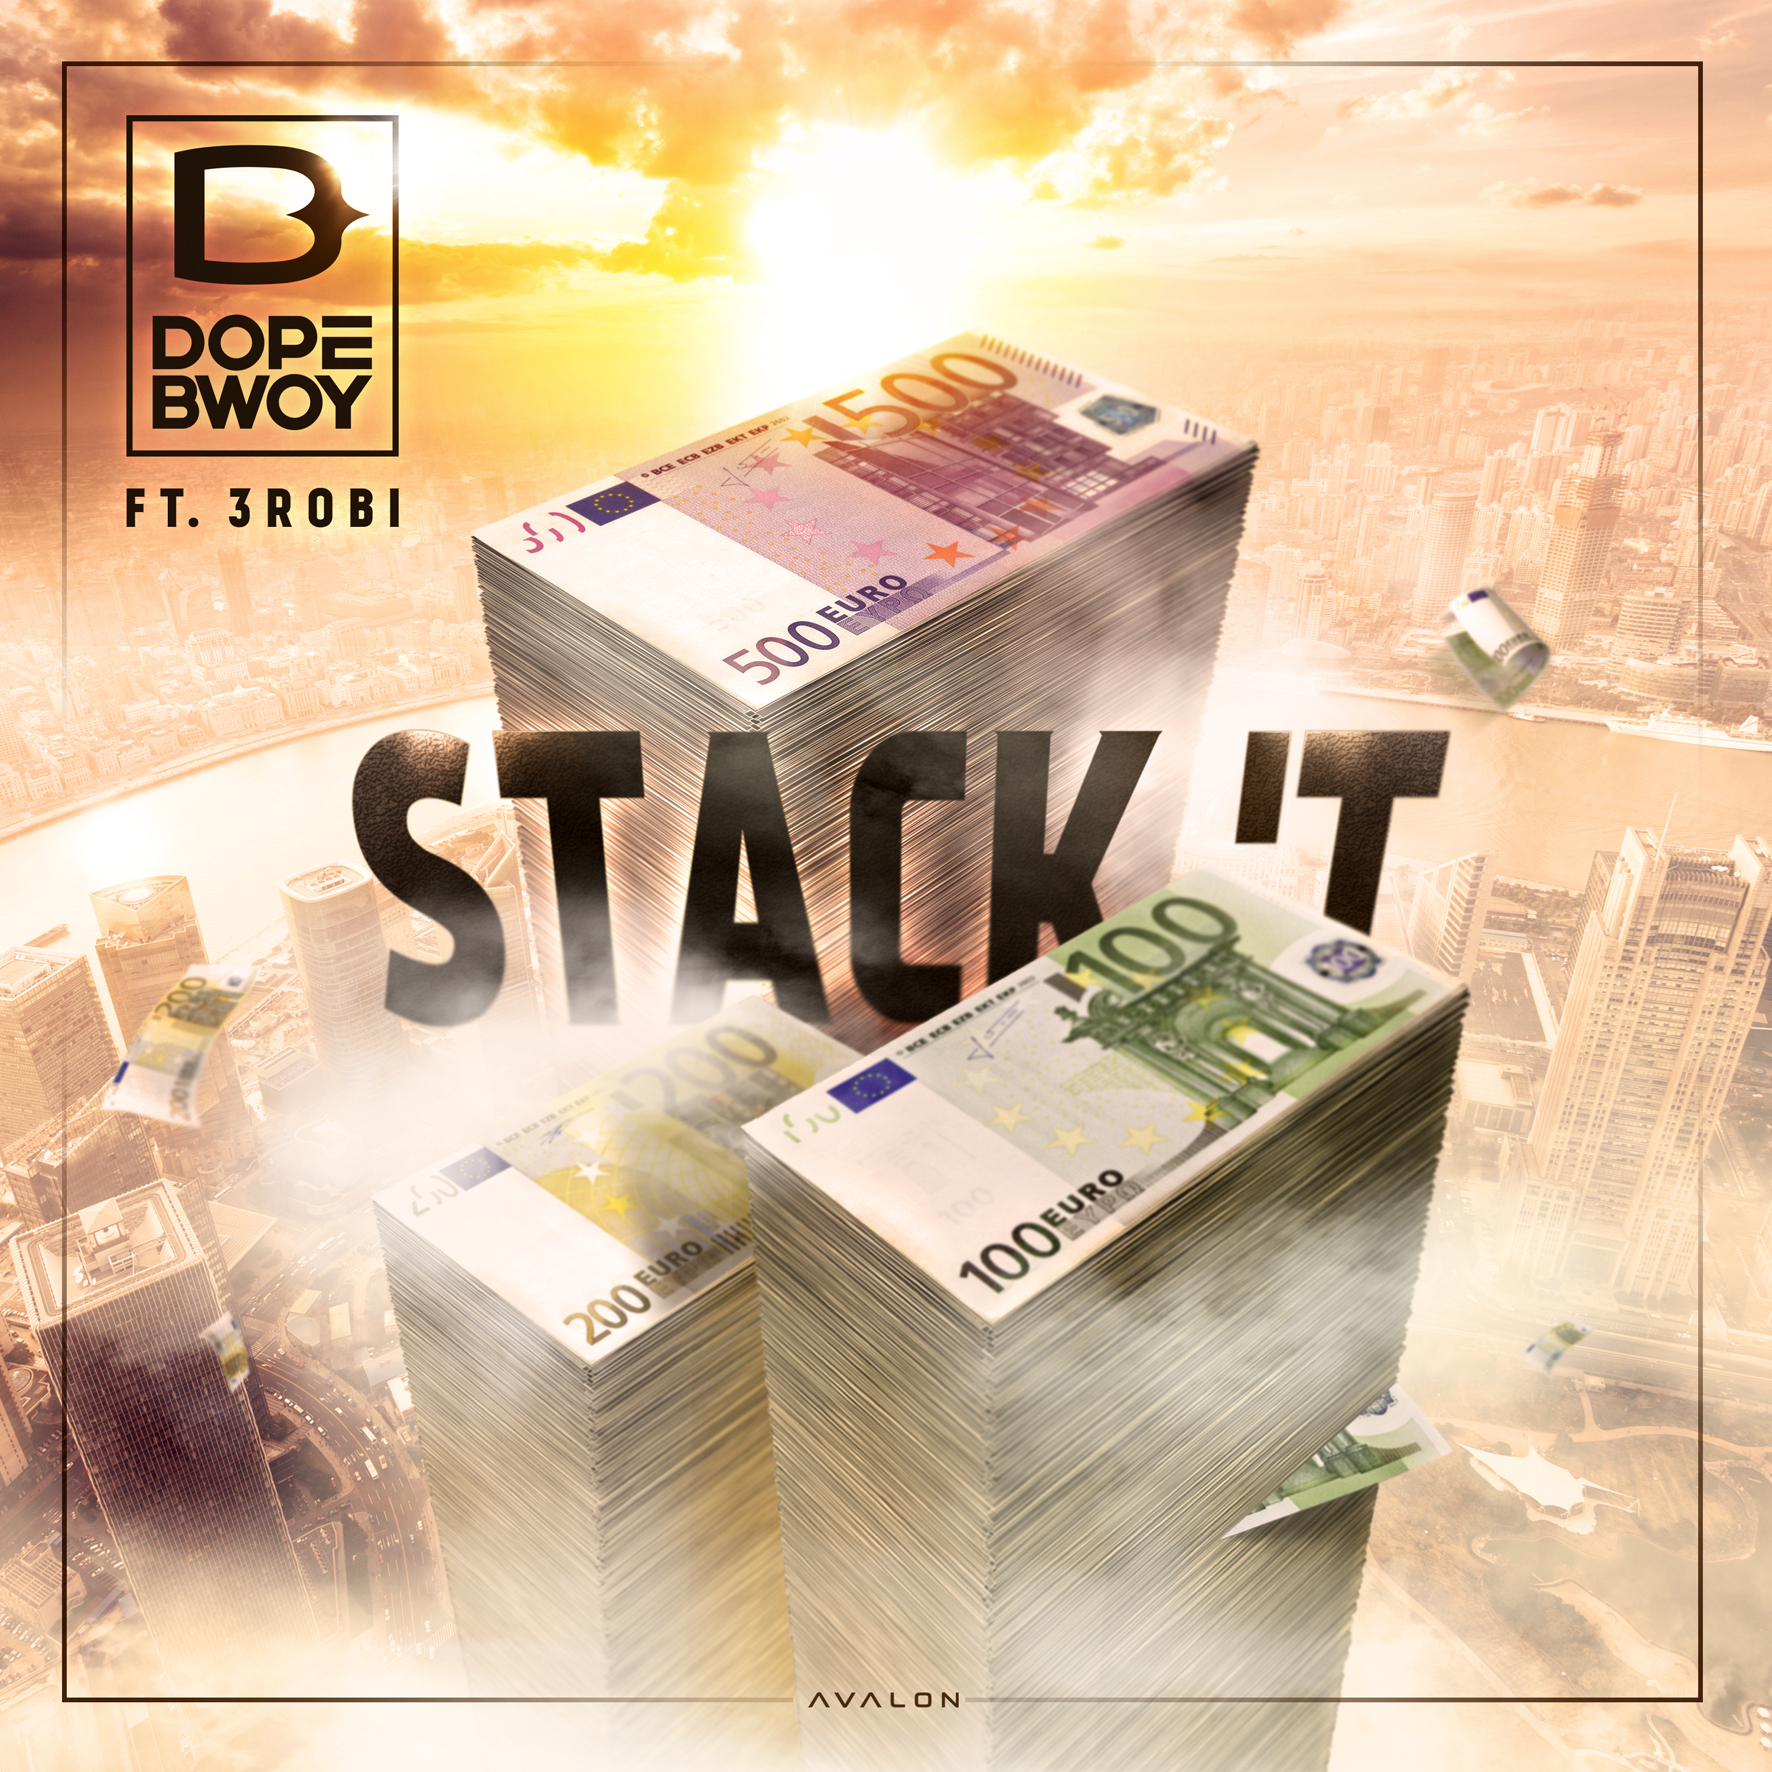 [COVER] Dopebwoy – Stack’t ft. 3robi